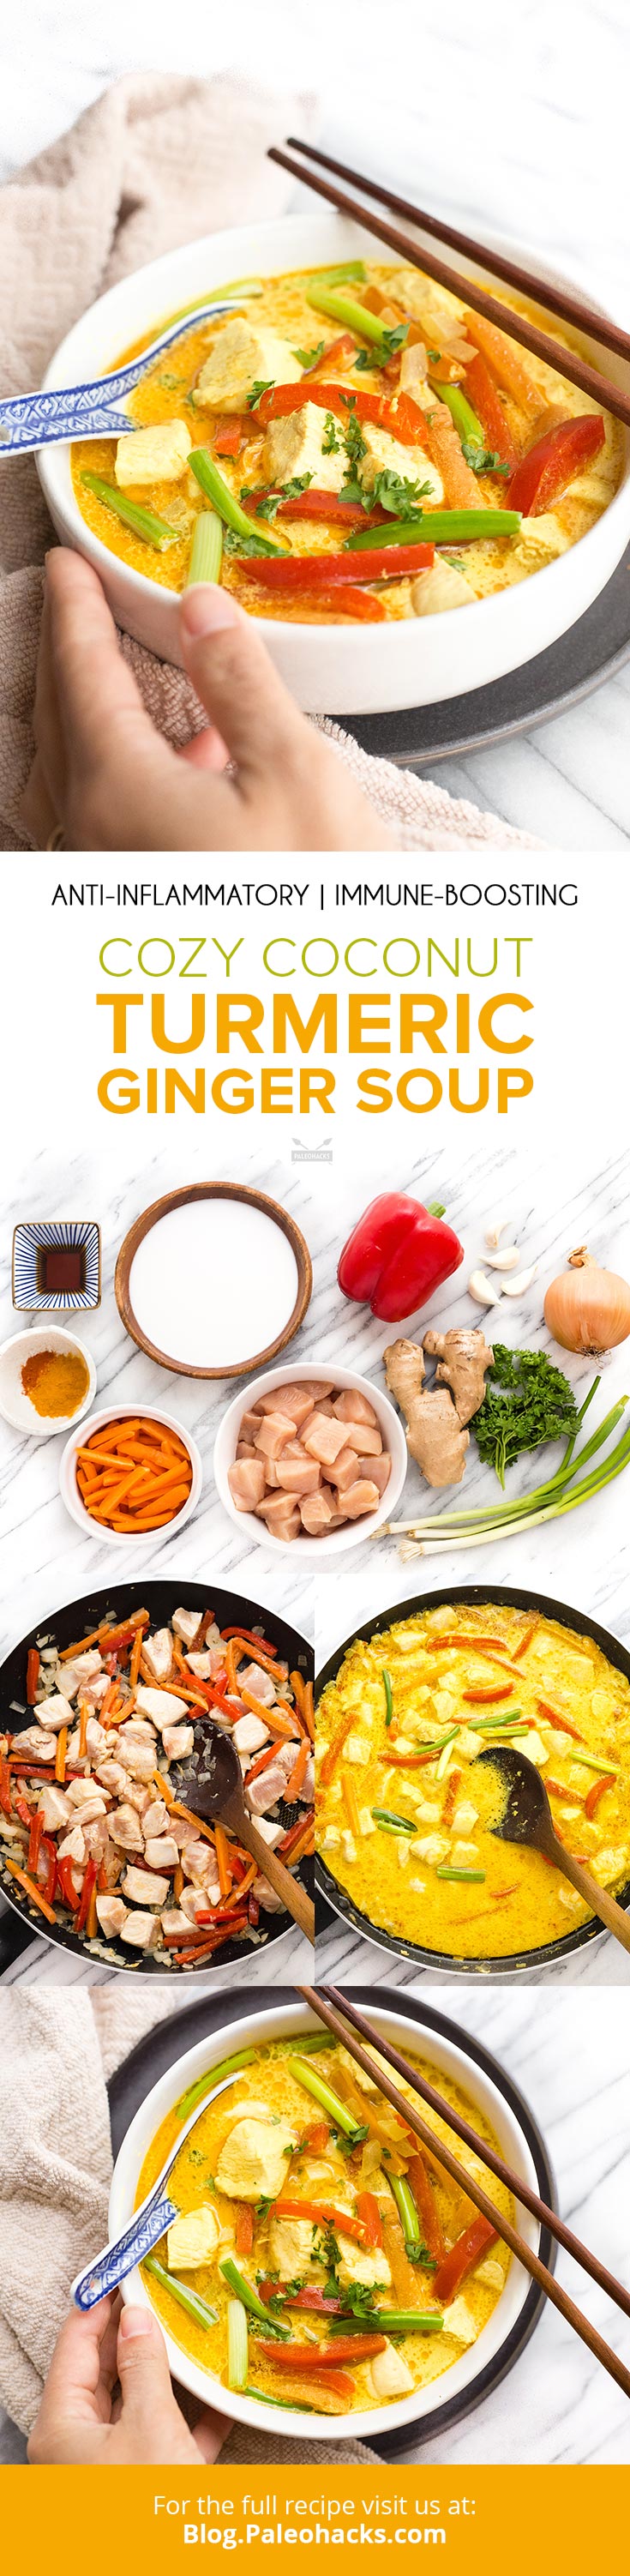 Cozy up with this Thai-inspired soup that’s filled with anti-inflammatory and immune-boosting benefits. Spicy, savory, and slurp-worthy!